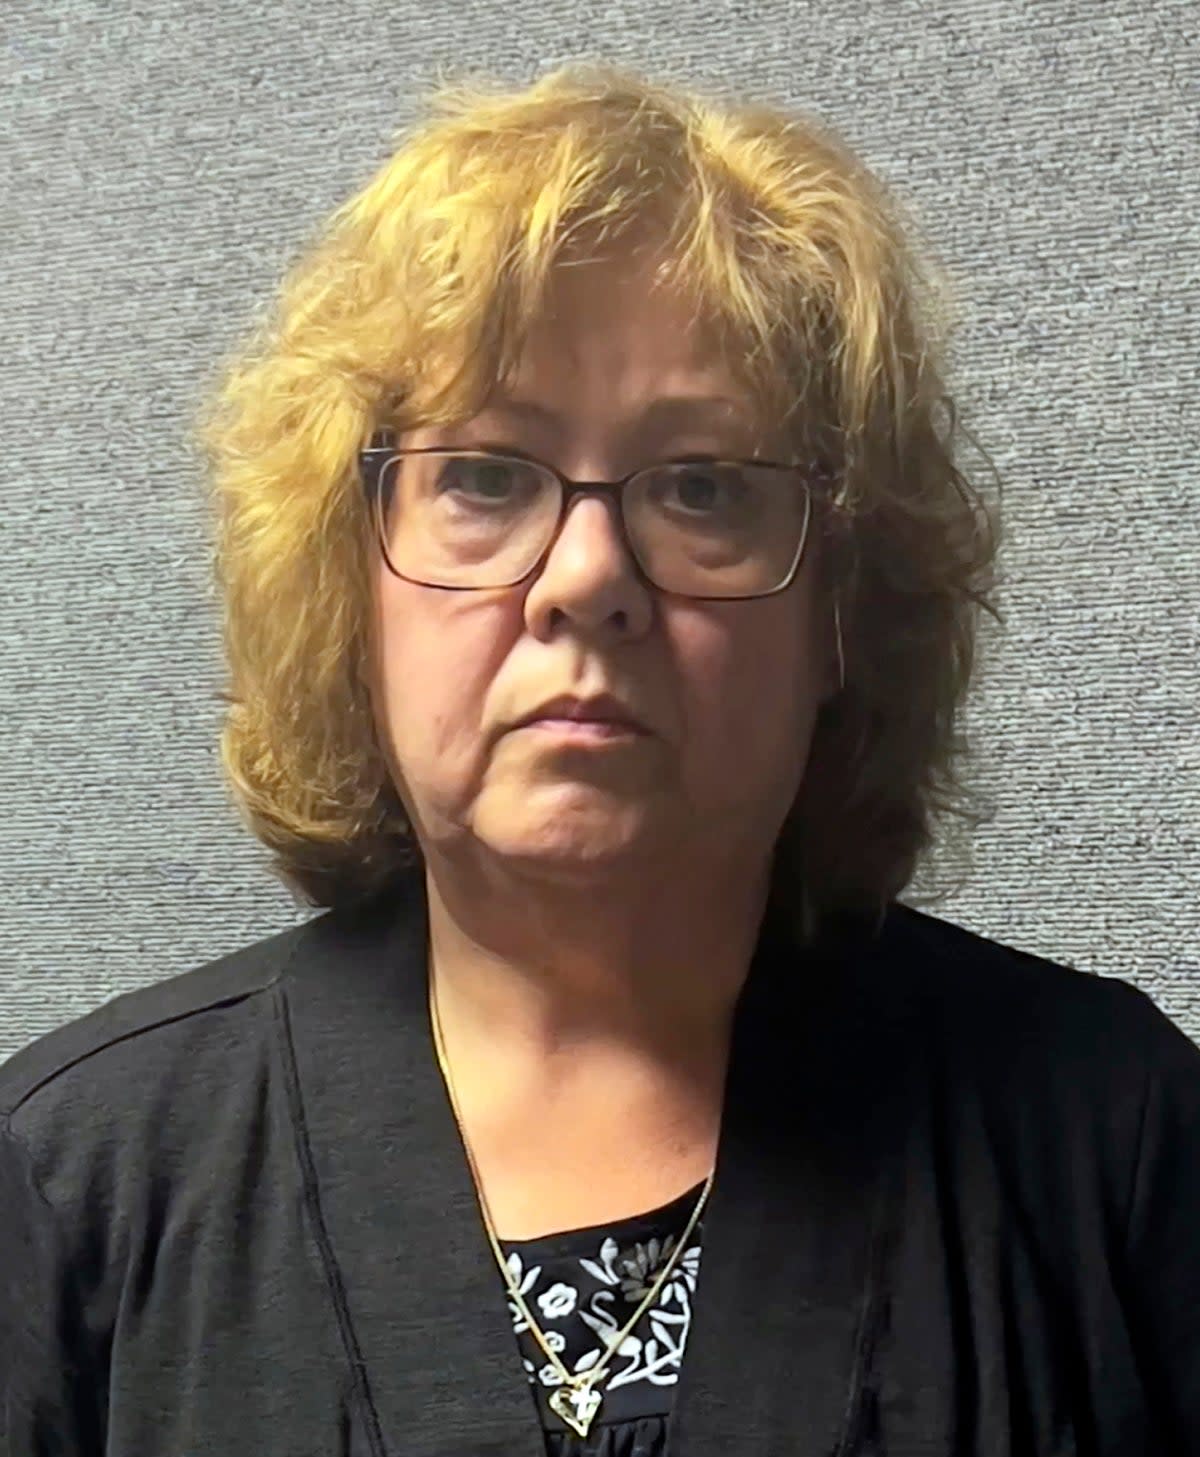 Susan Lorincz haș been charged with the manslaughter of her neighbour Ajike Owens (Marion County Sheriff’s Office)